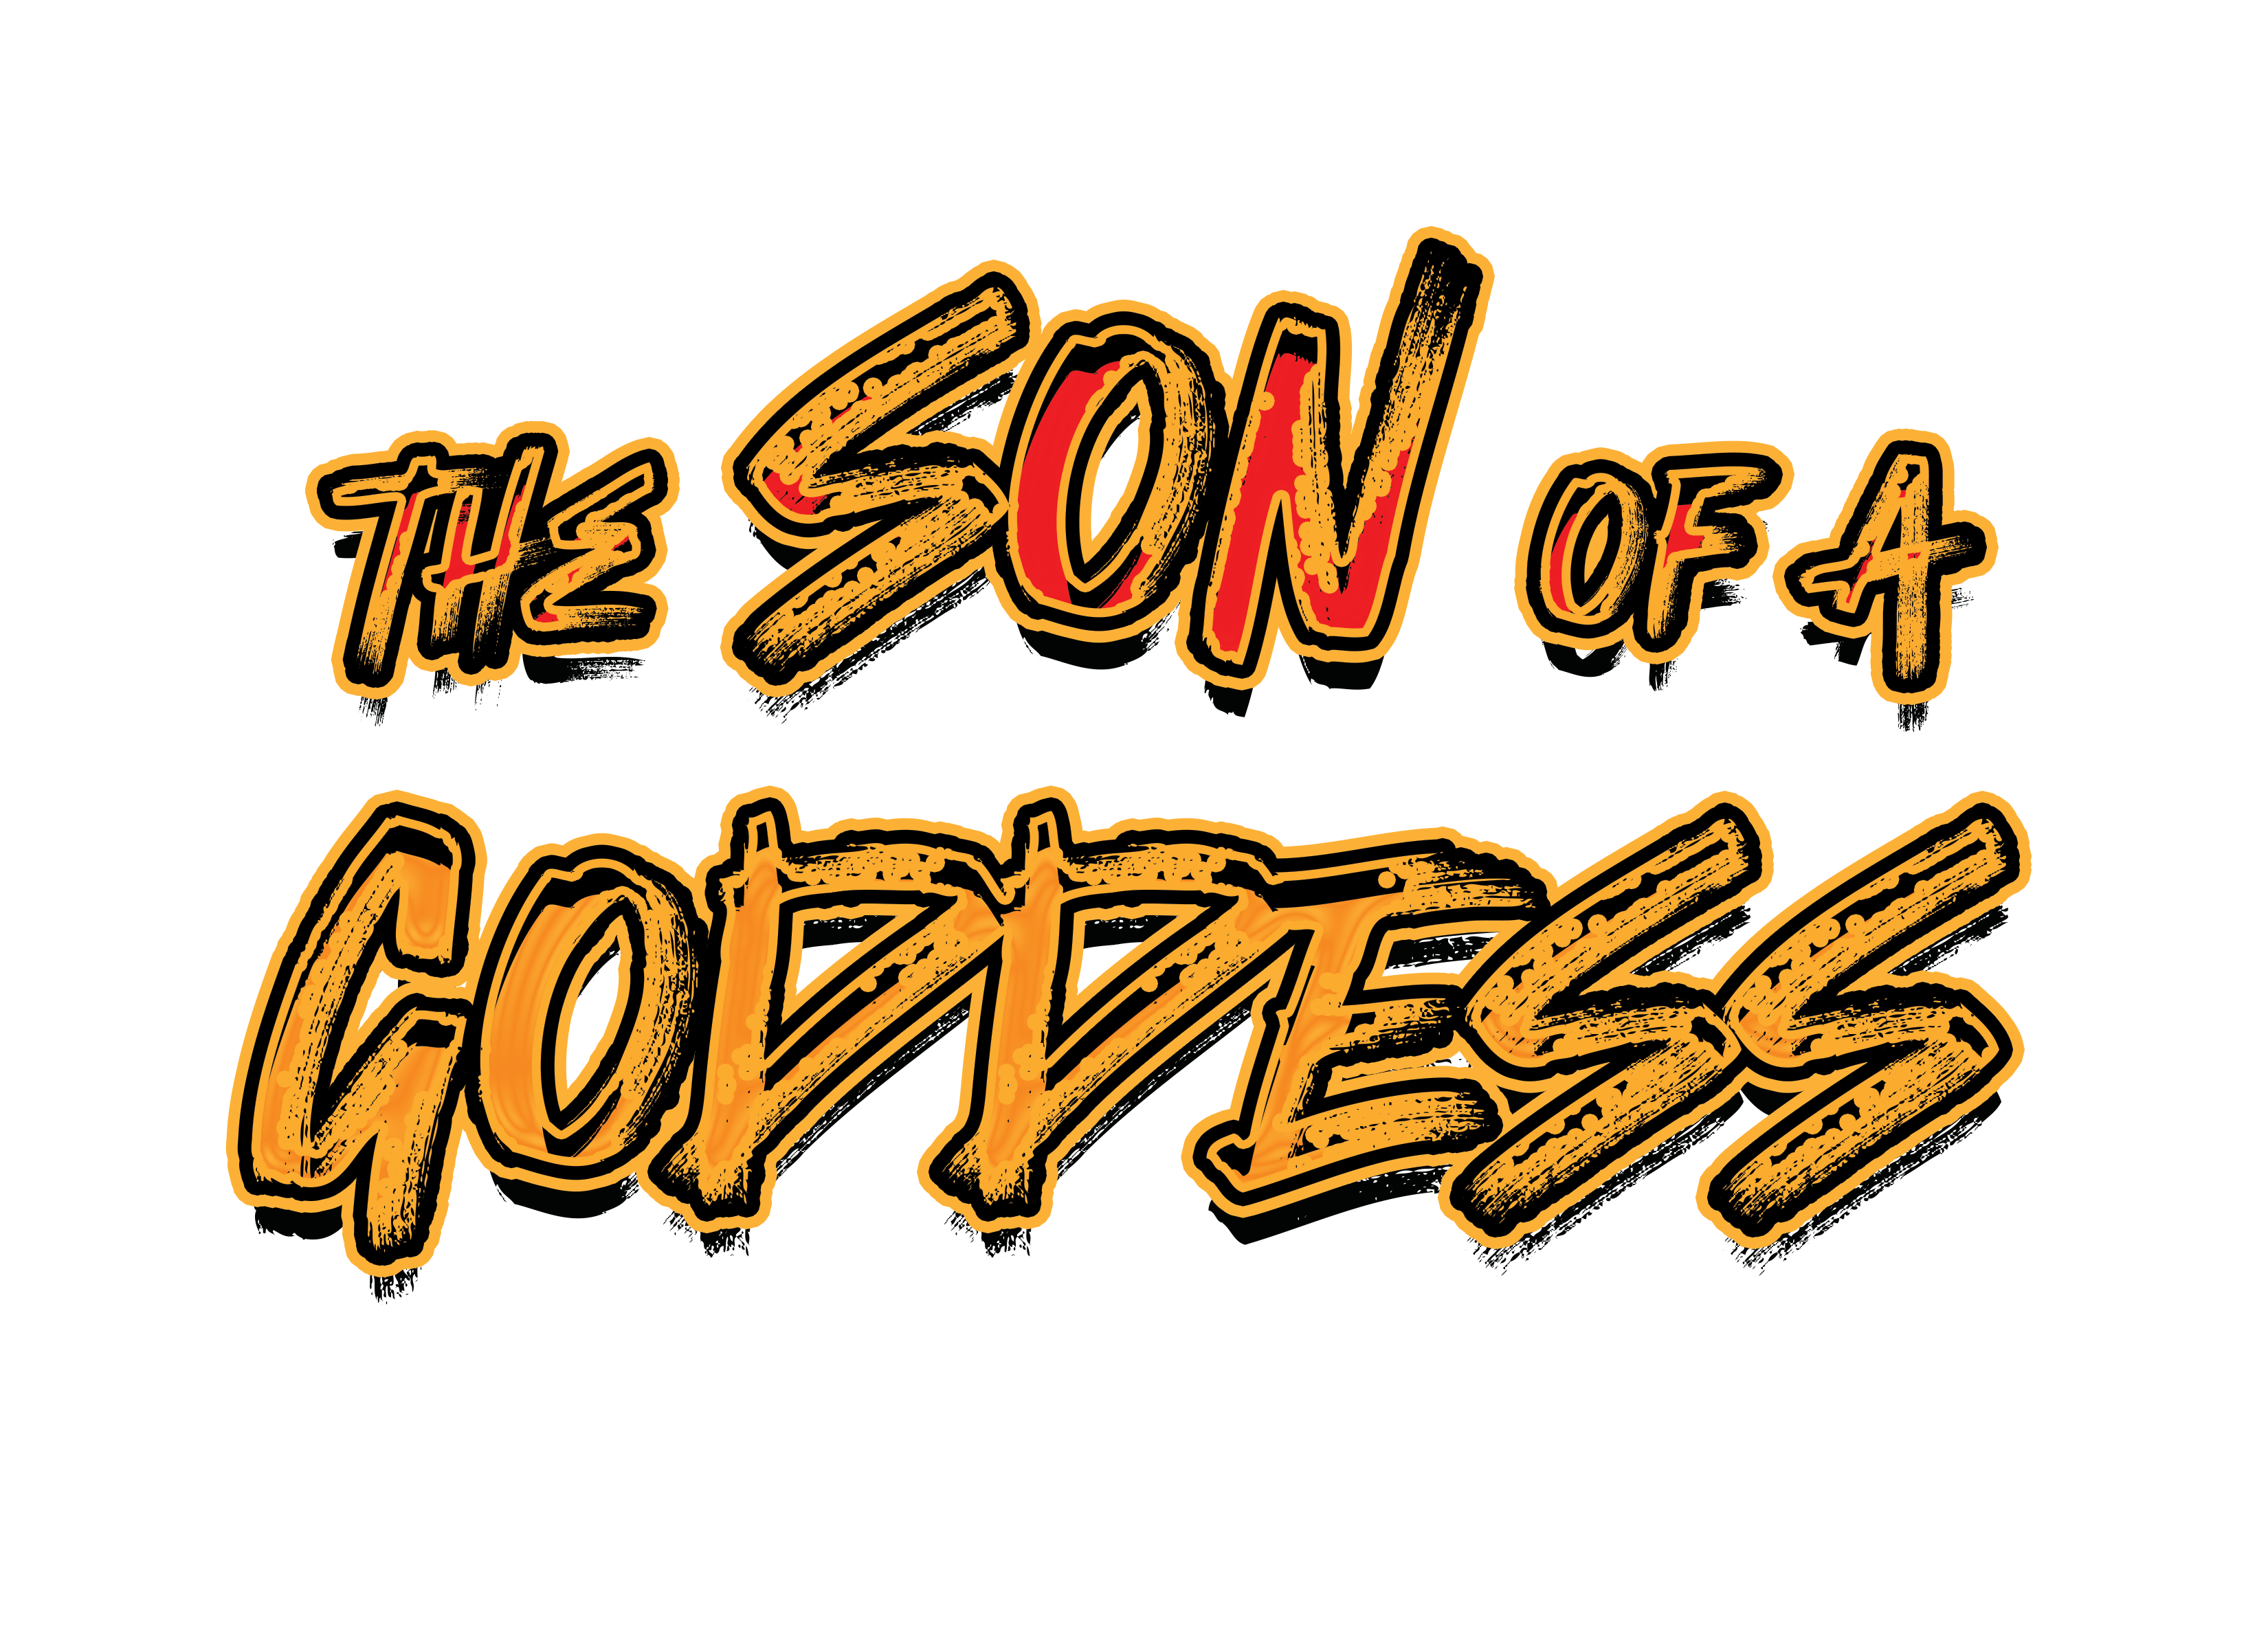 THE SON OF A GODDESS CLOTHING